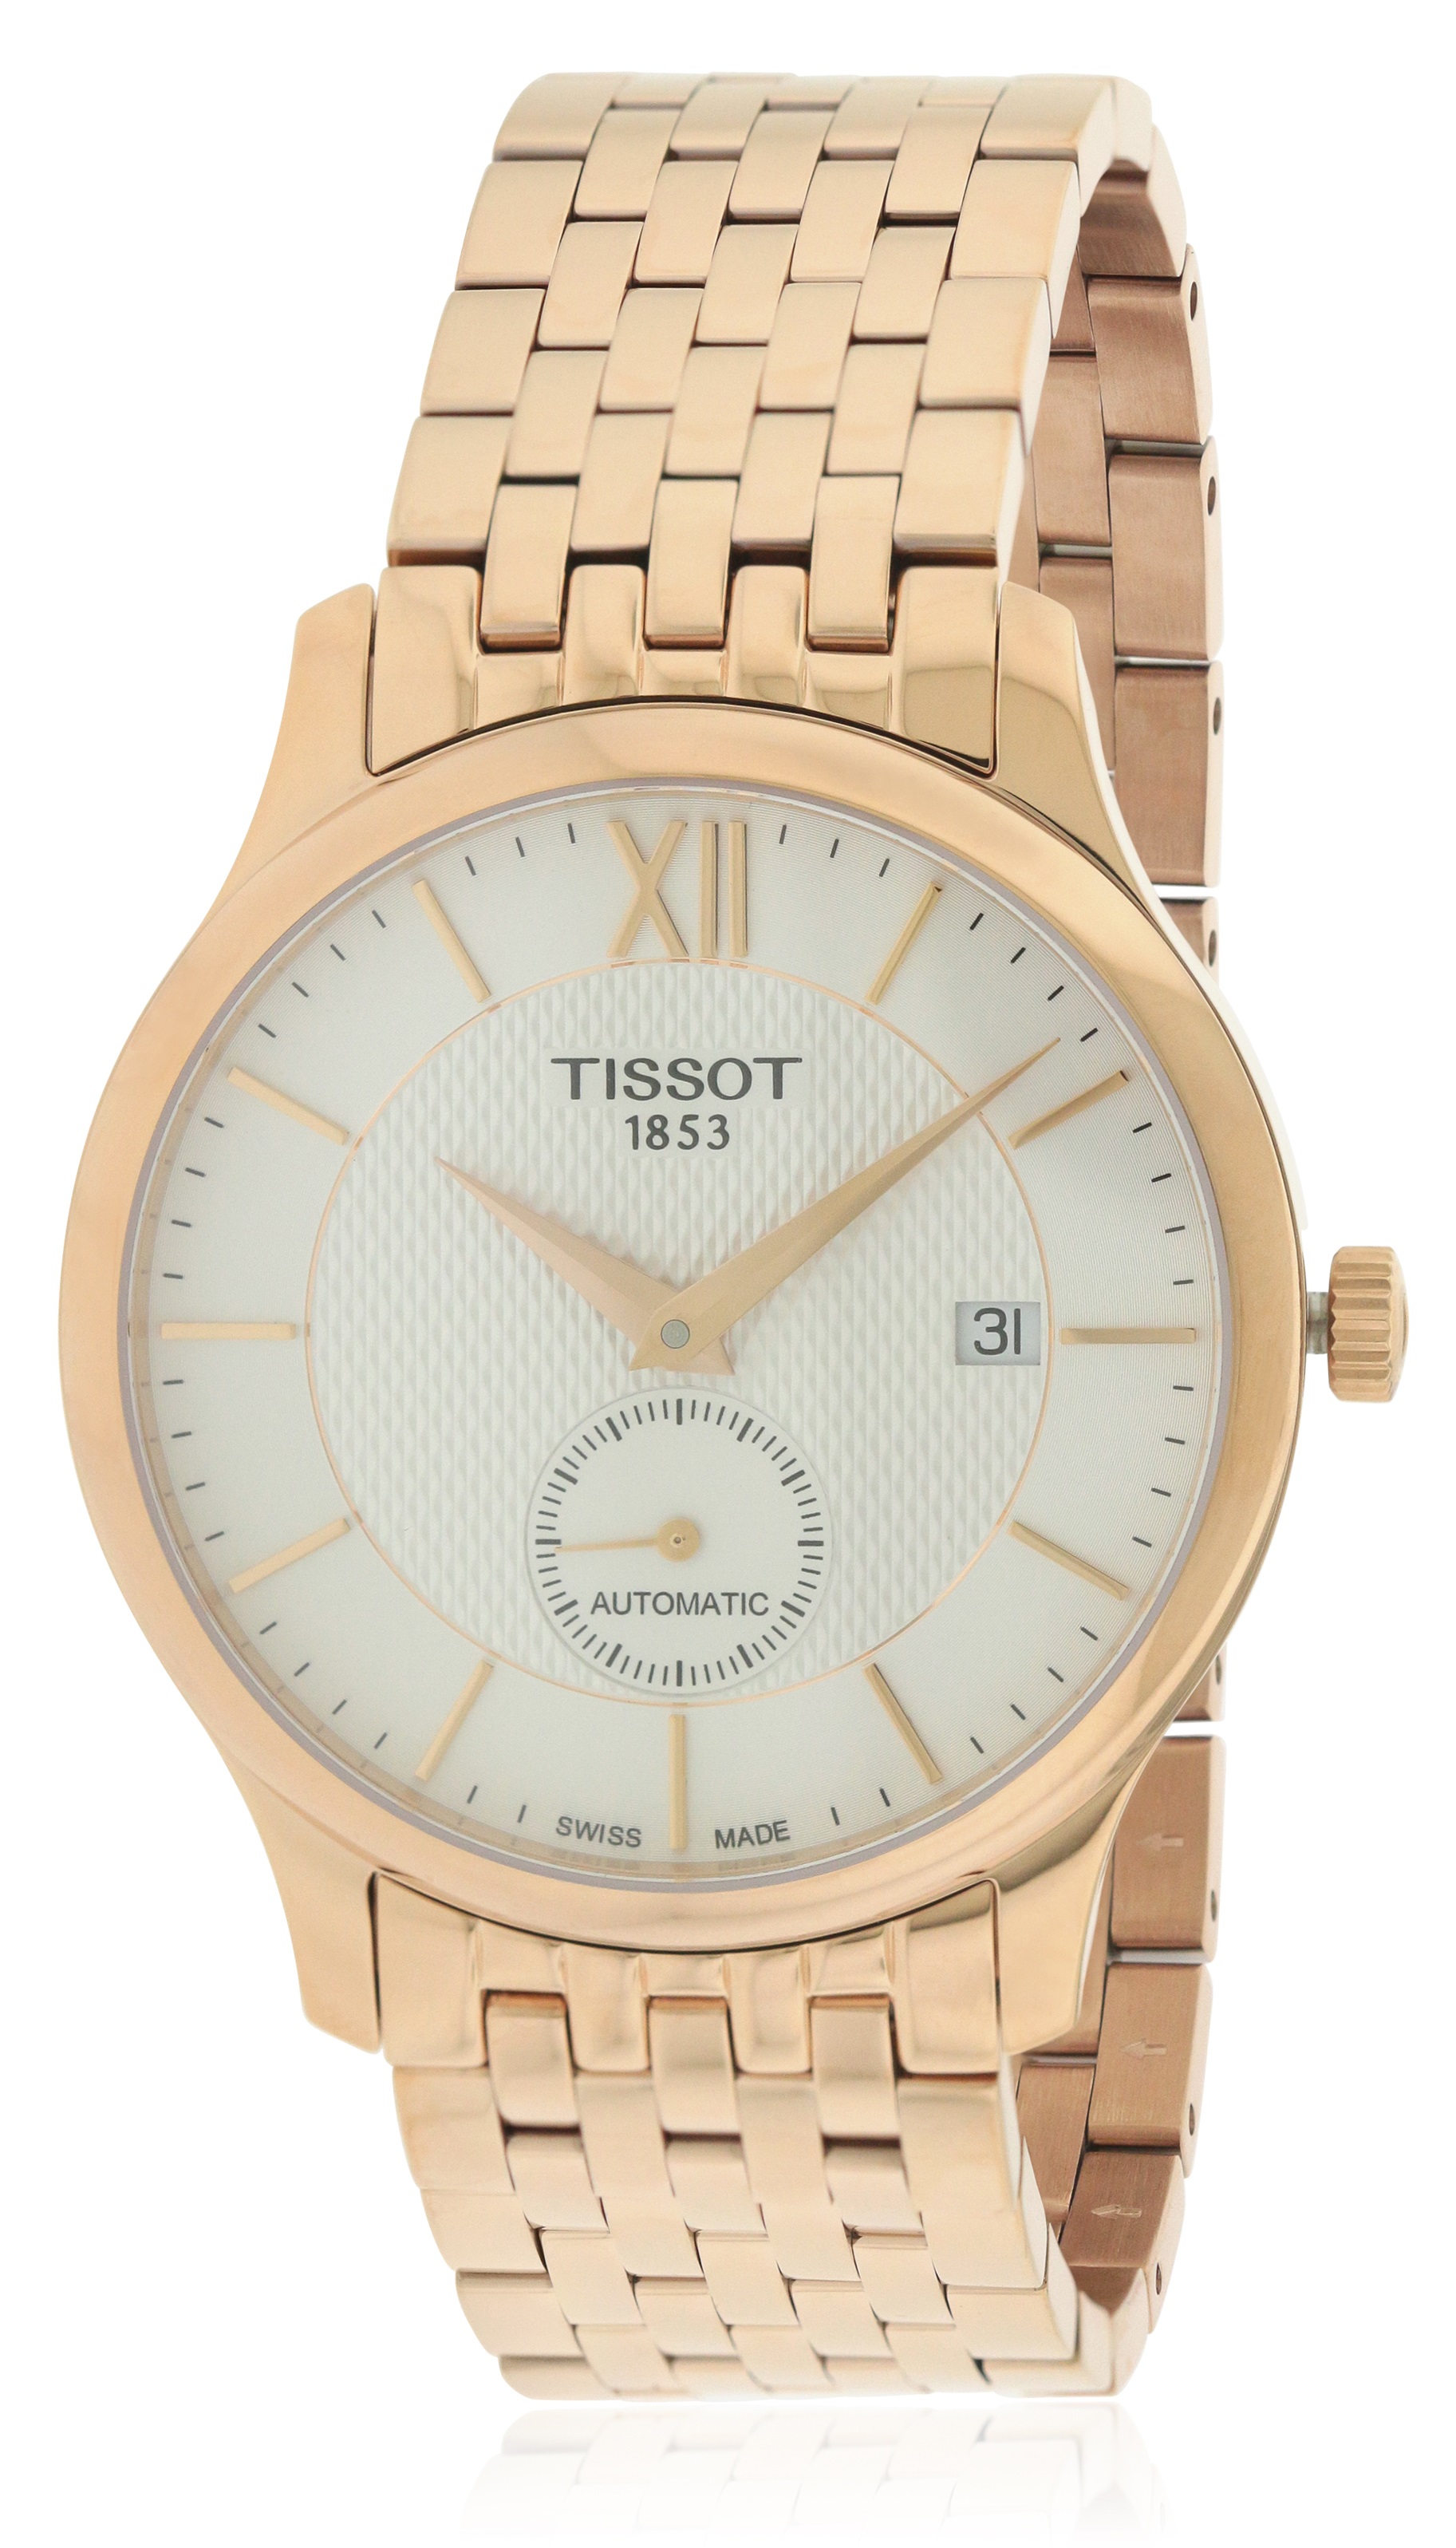 Tissot Tradition Automatic Rose Gold-tone Stainless Steel Mens Watch T0634283303800